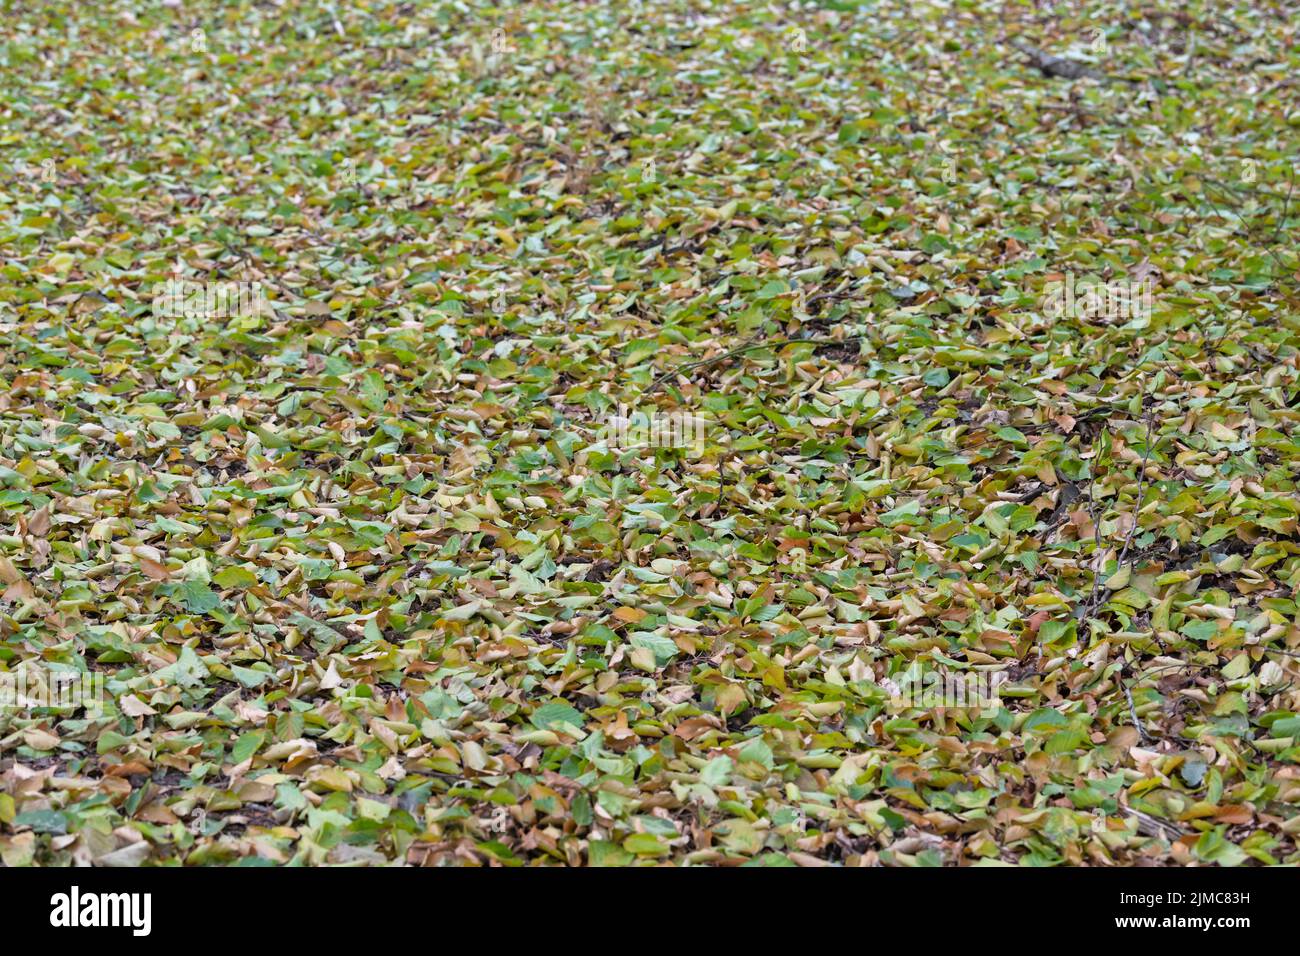 Fallen green leaves by drought in nature Stock Photo